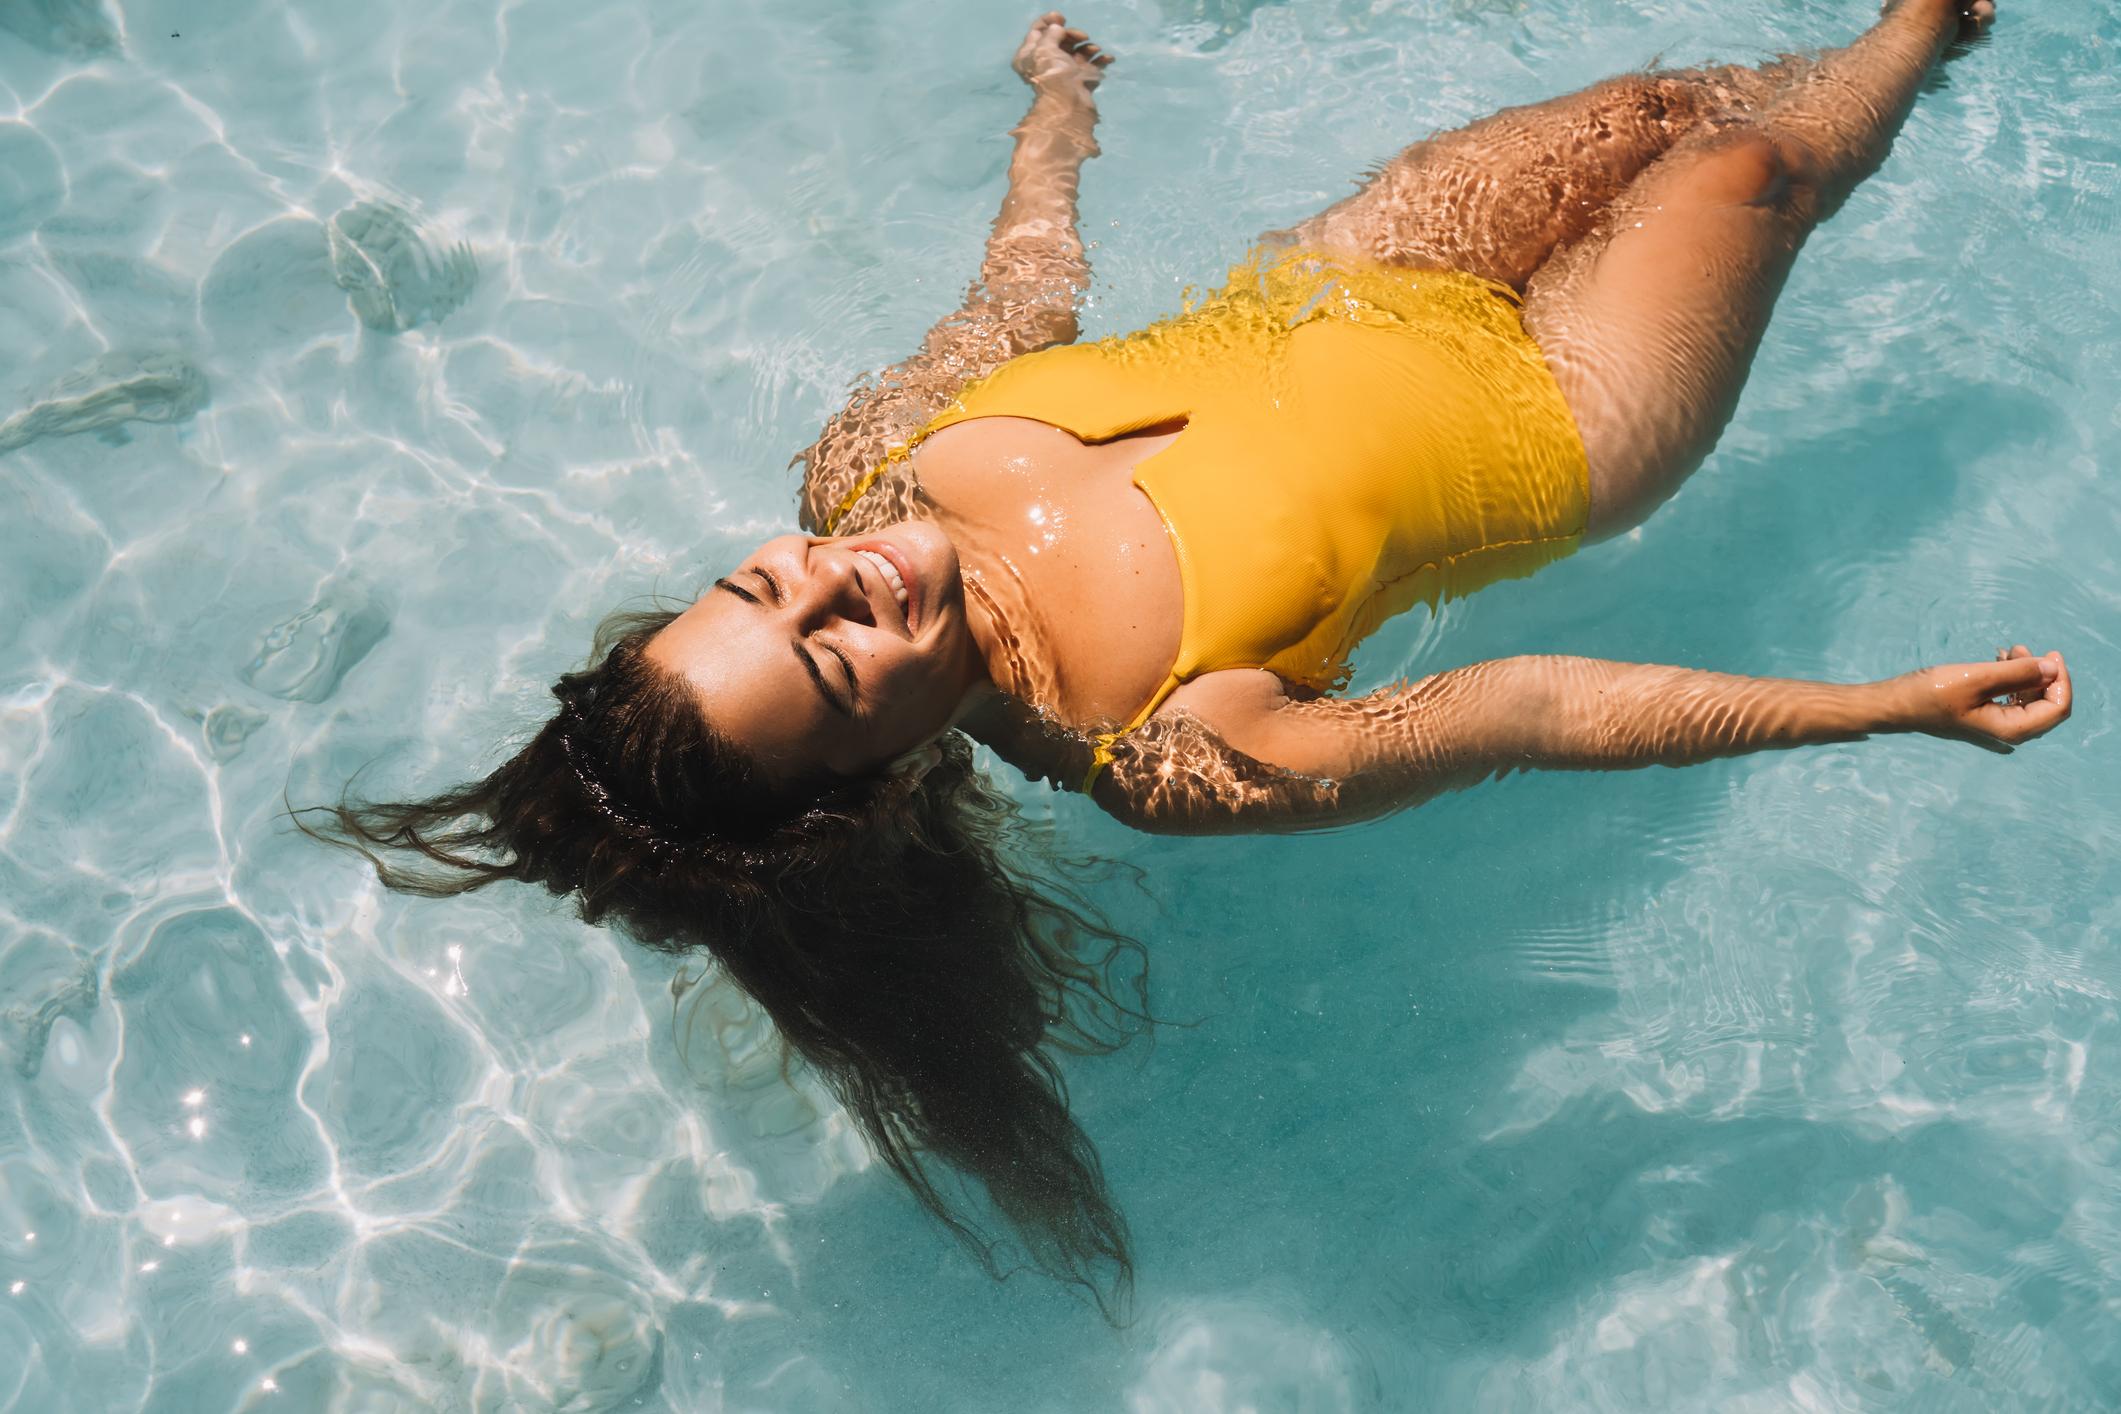  A relaxed woman wearing a yellow swimsuit floating in a pool.  